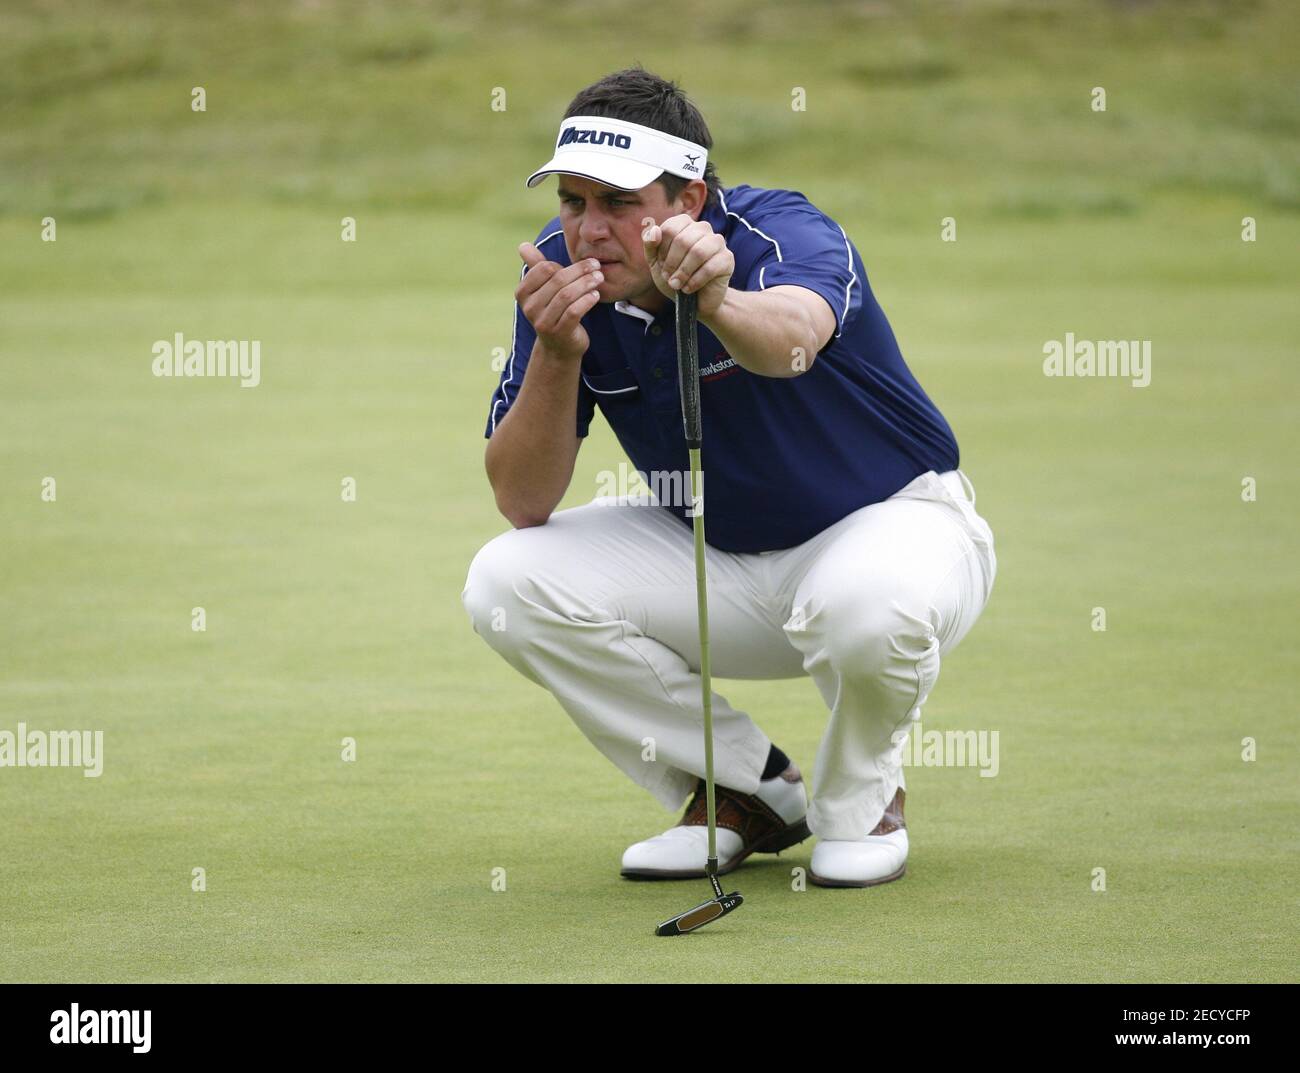 Golf - The KLM Open - Kennemer Golf & Country Club - Zandvoort - The  Netherlands - 24/8/08 England's Sam Walker Mandatory Credit: Action Images  / Andrew Boyers Stock Photo - Alamy